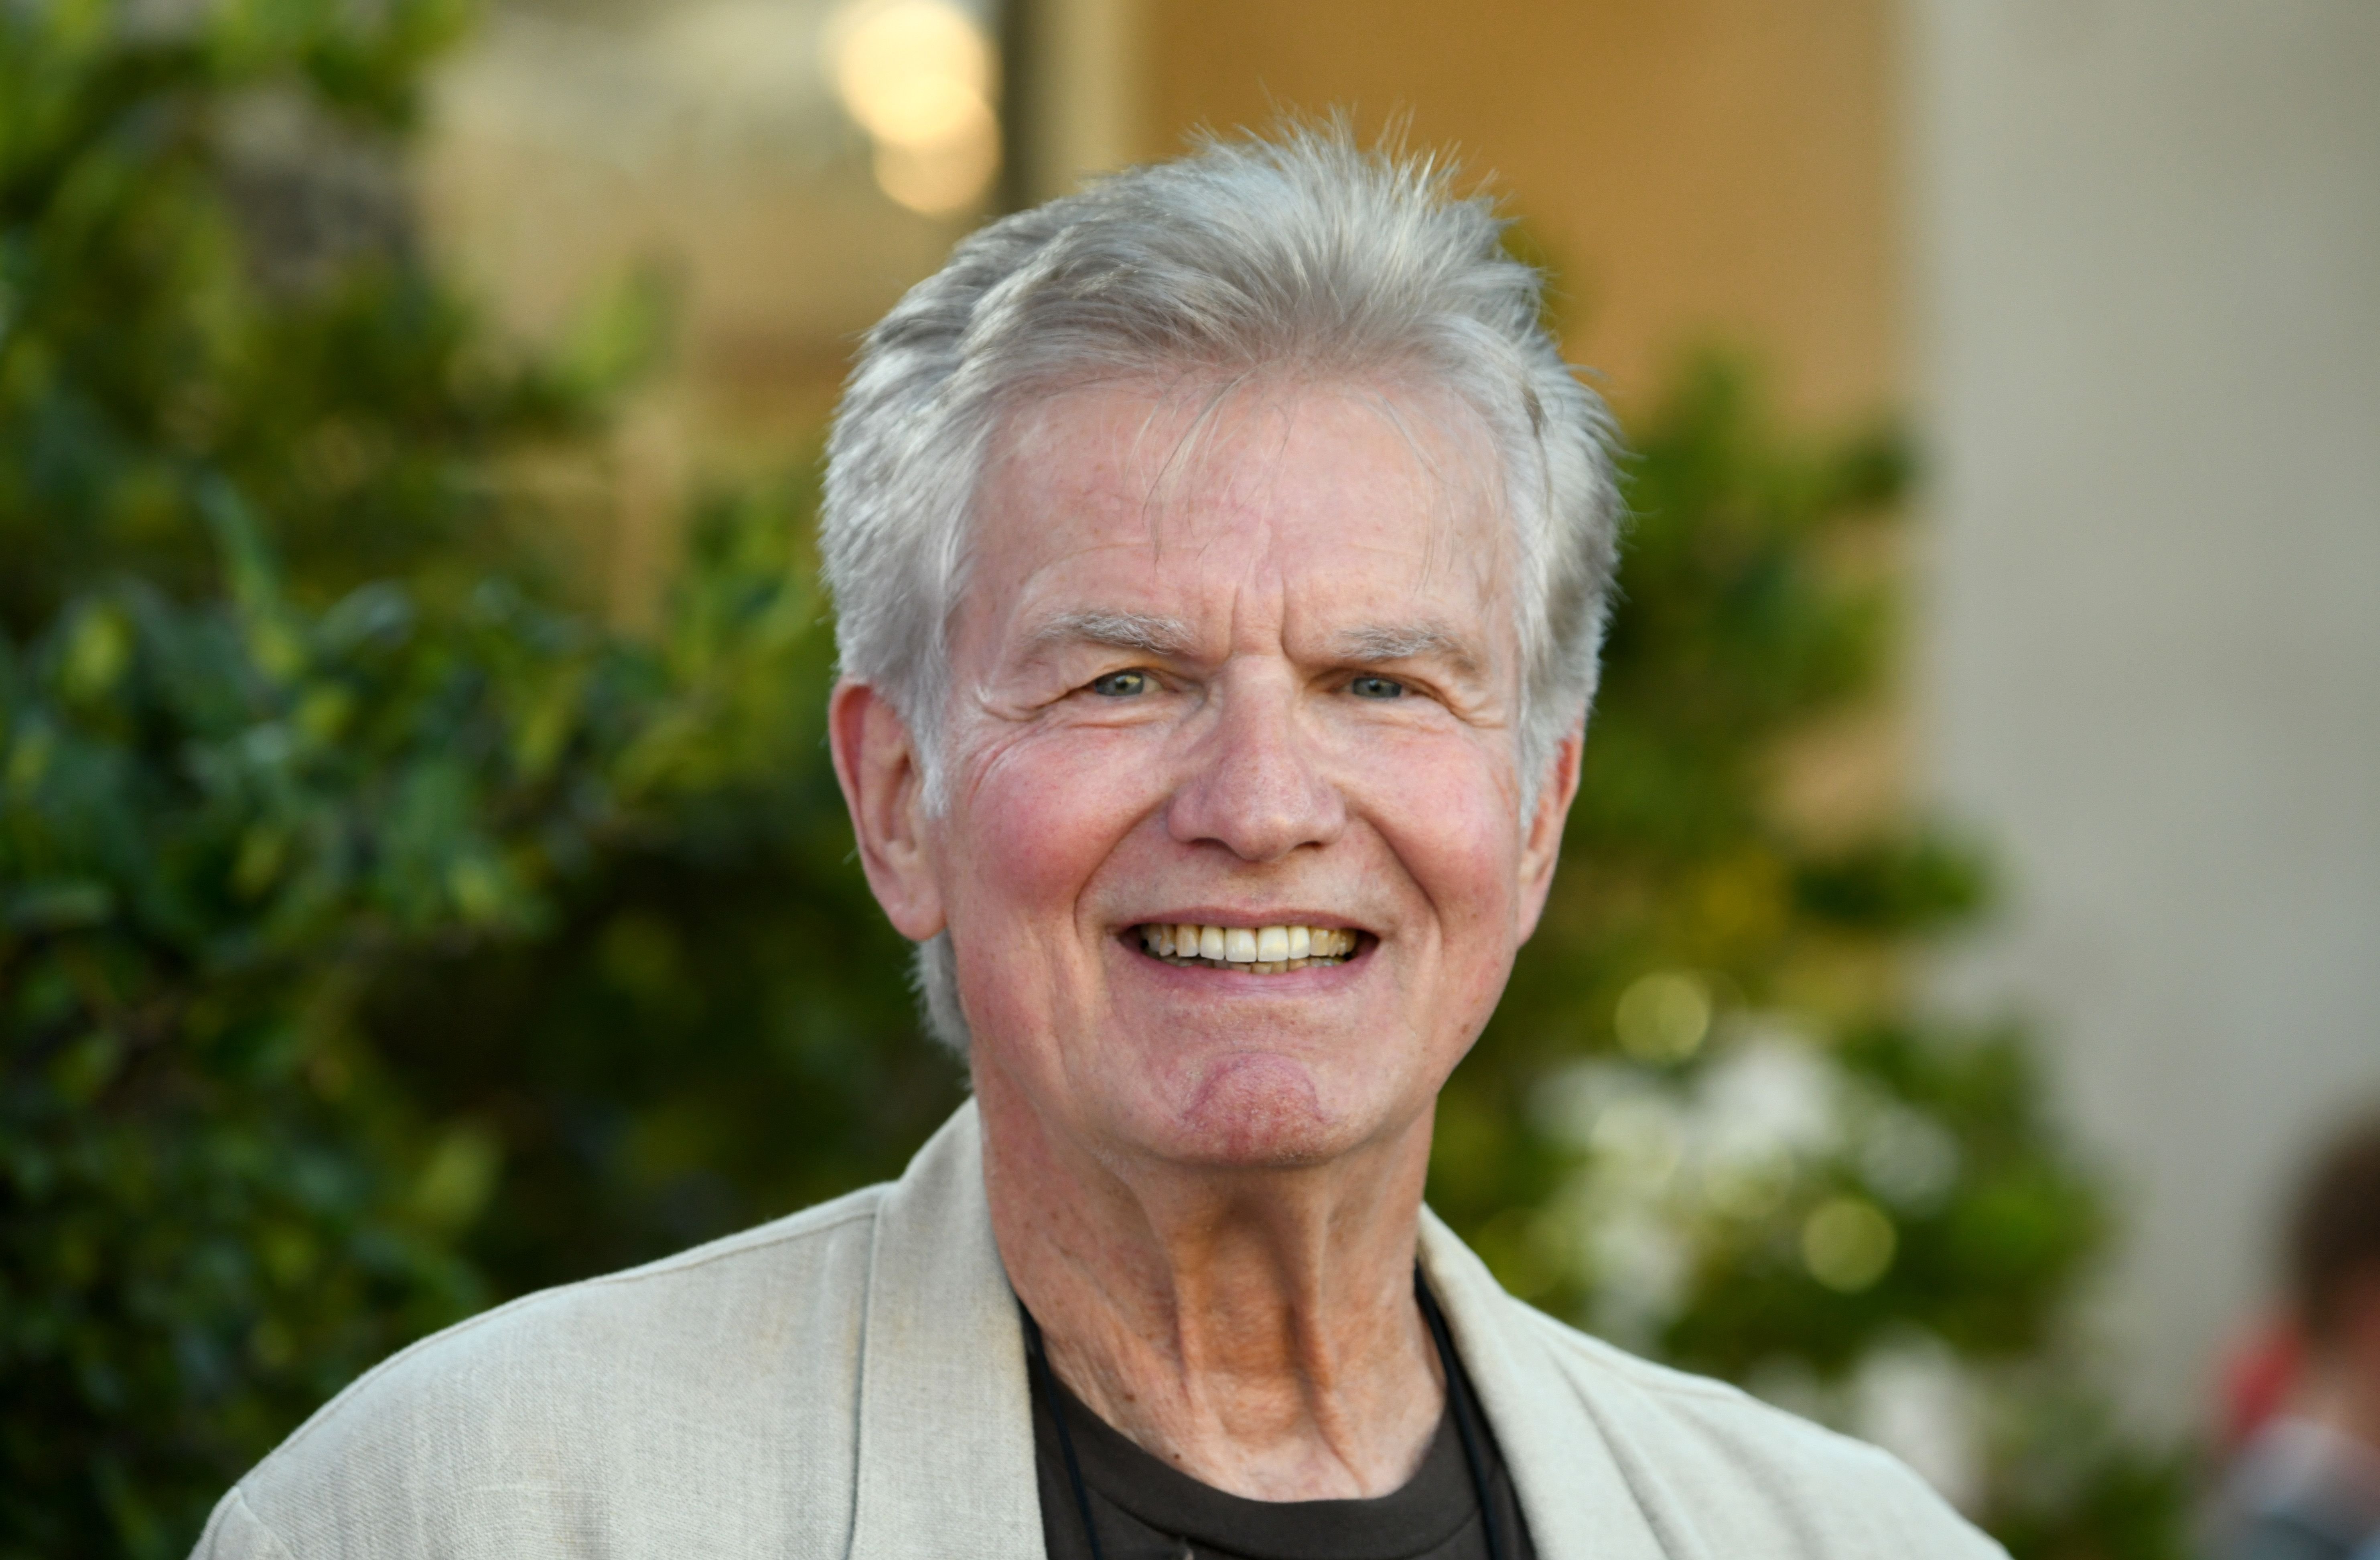 Kent McCord at the 2019 Festival of Arts Celebrity Benefit Event on August 24, 2019 | Photo: Getty Images